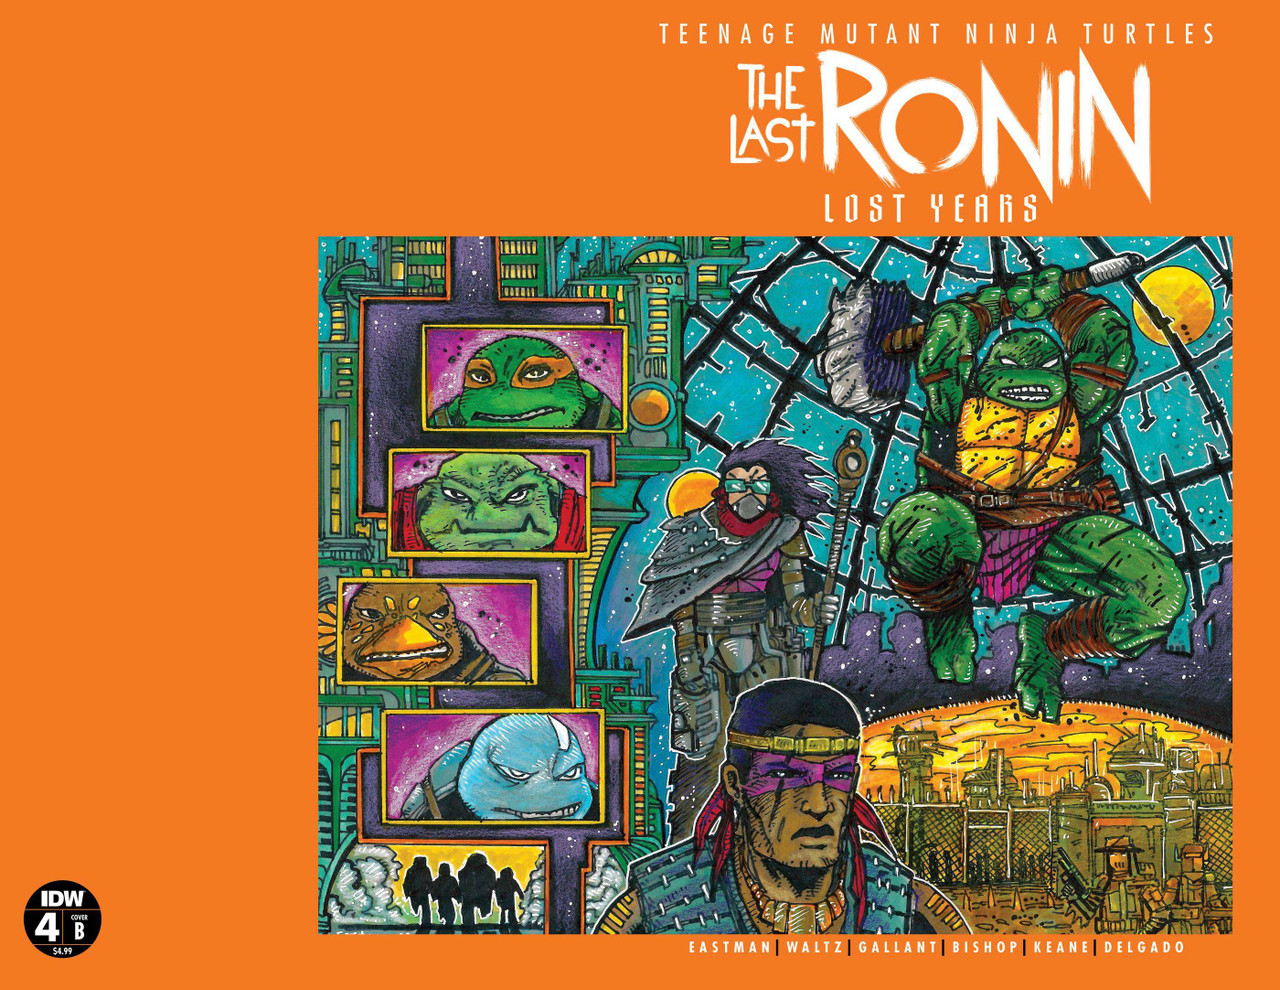 https://cdn11.bigcommerce.com/s-8j9ytfqbd1/images/stencil/1280x1280/products/1026/9225/TMNT-The-Last-Ronin-Lost-Years-Issue-4-COVER-B-EASTMAN-BISHOP-Comic-Book_9224__76127.1688055062.jpg?c=1?imbypass=on